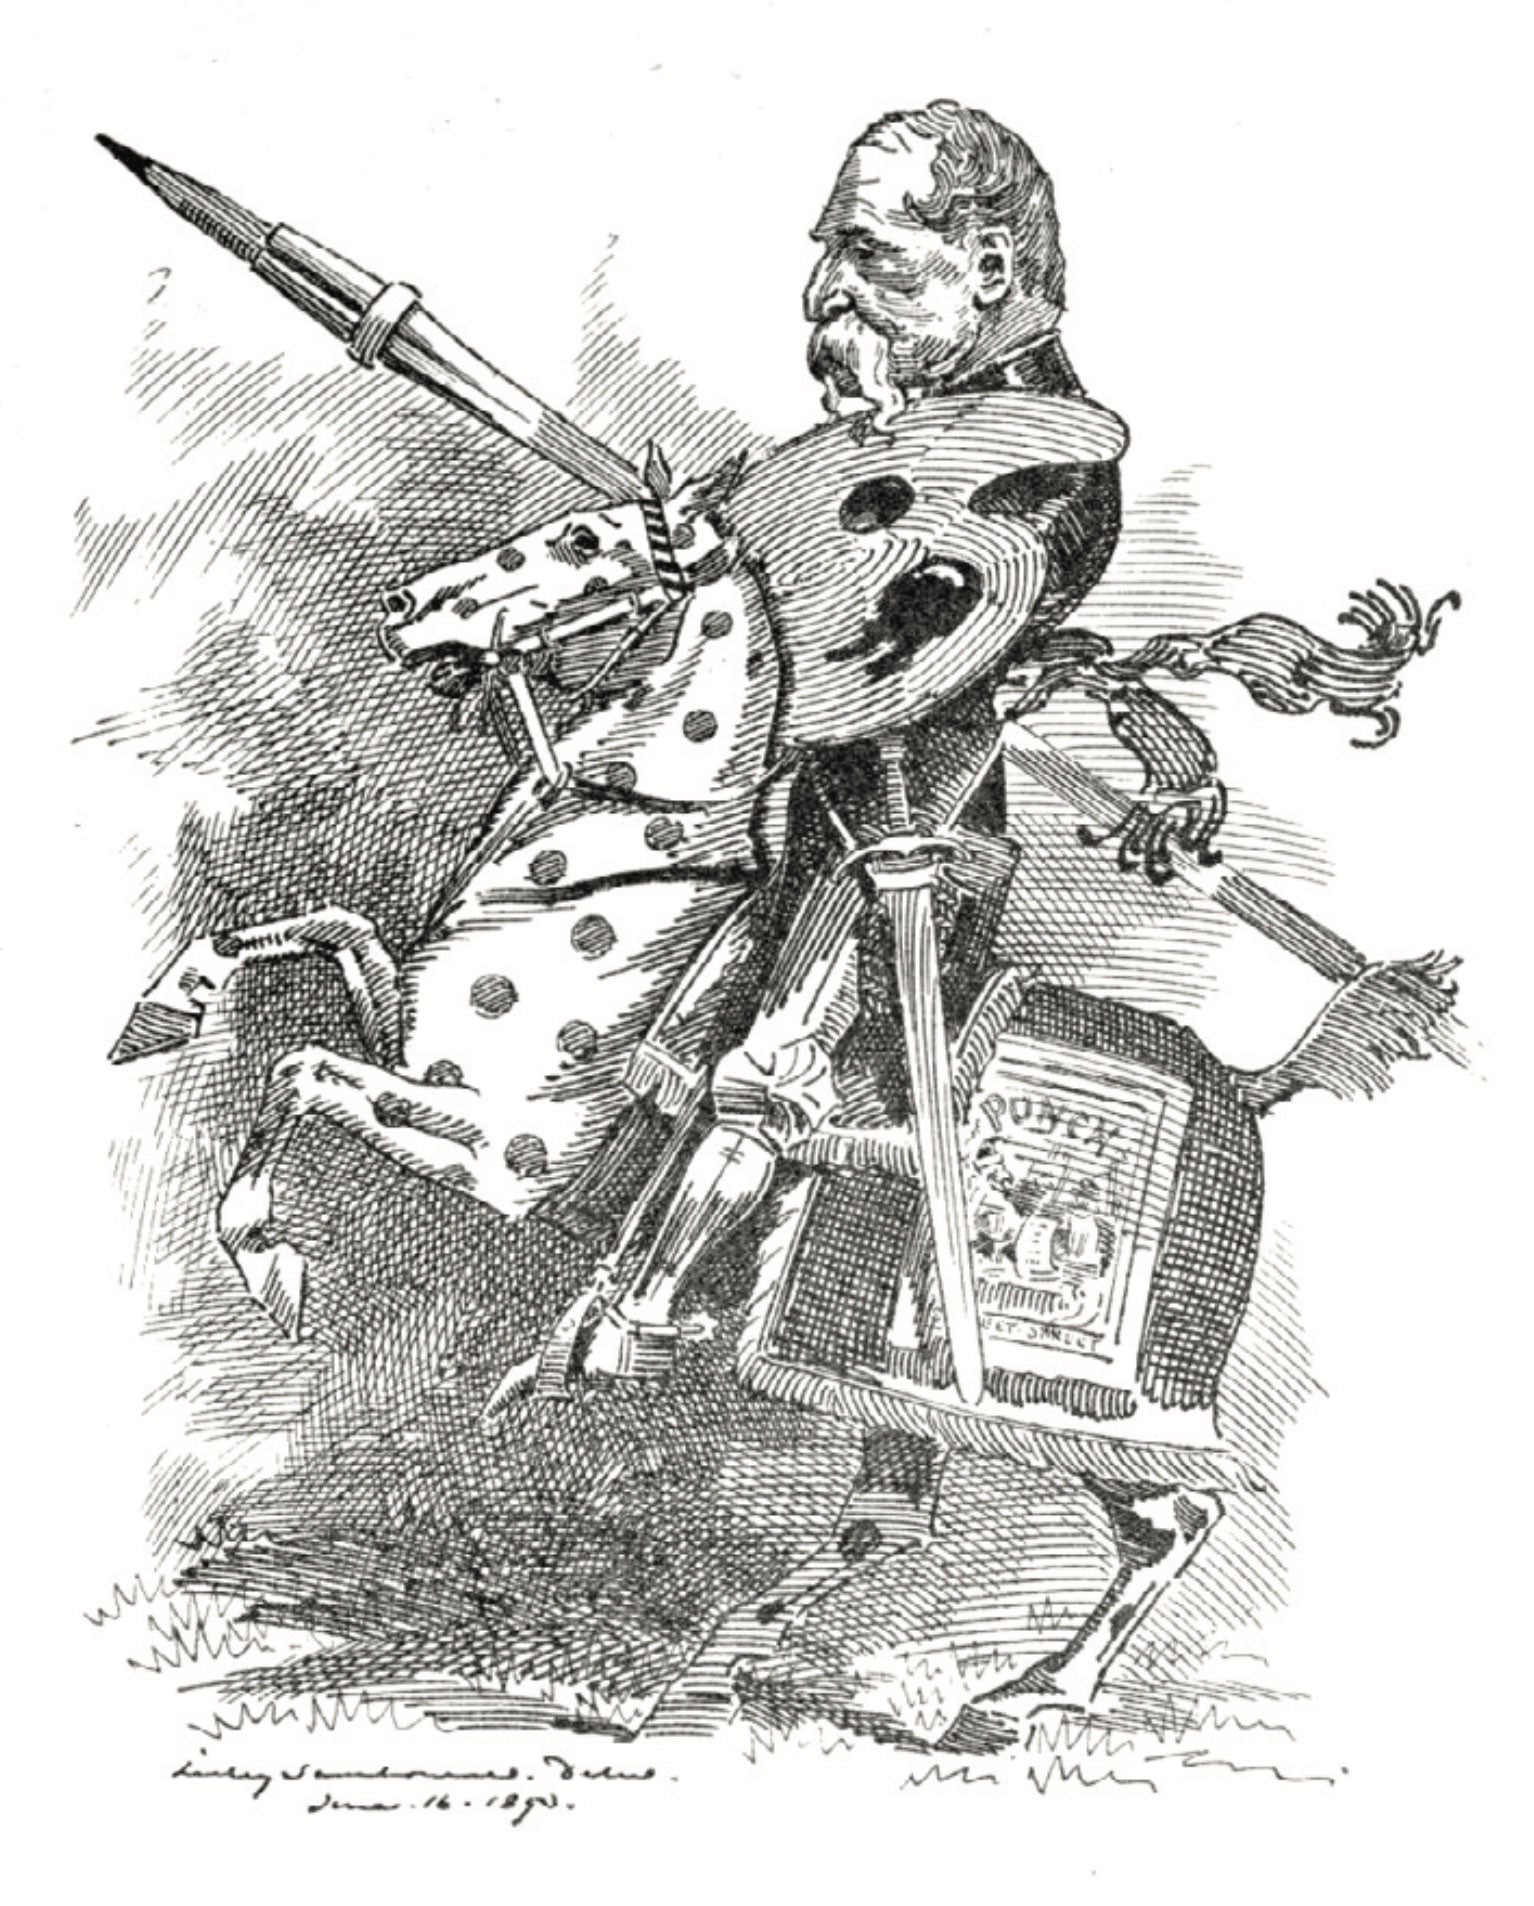 Linley Sambourne, The Black-and-White Knight, engraving in Punch, 1893; a tribute to Tenniel’s knighthood